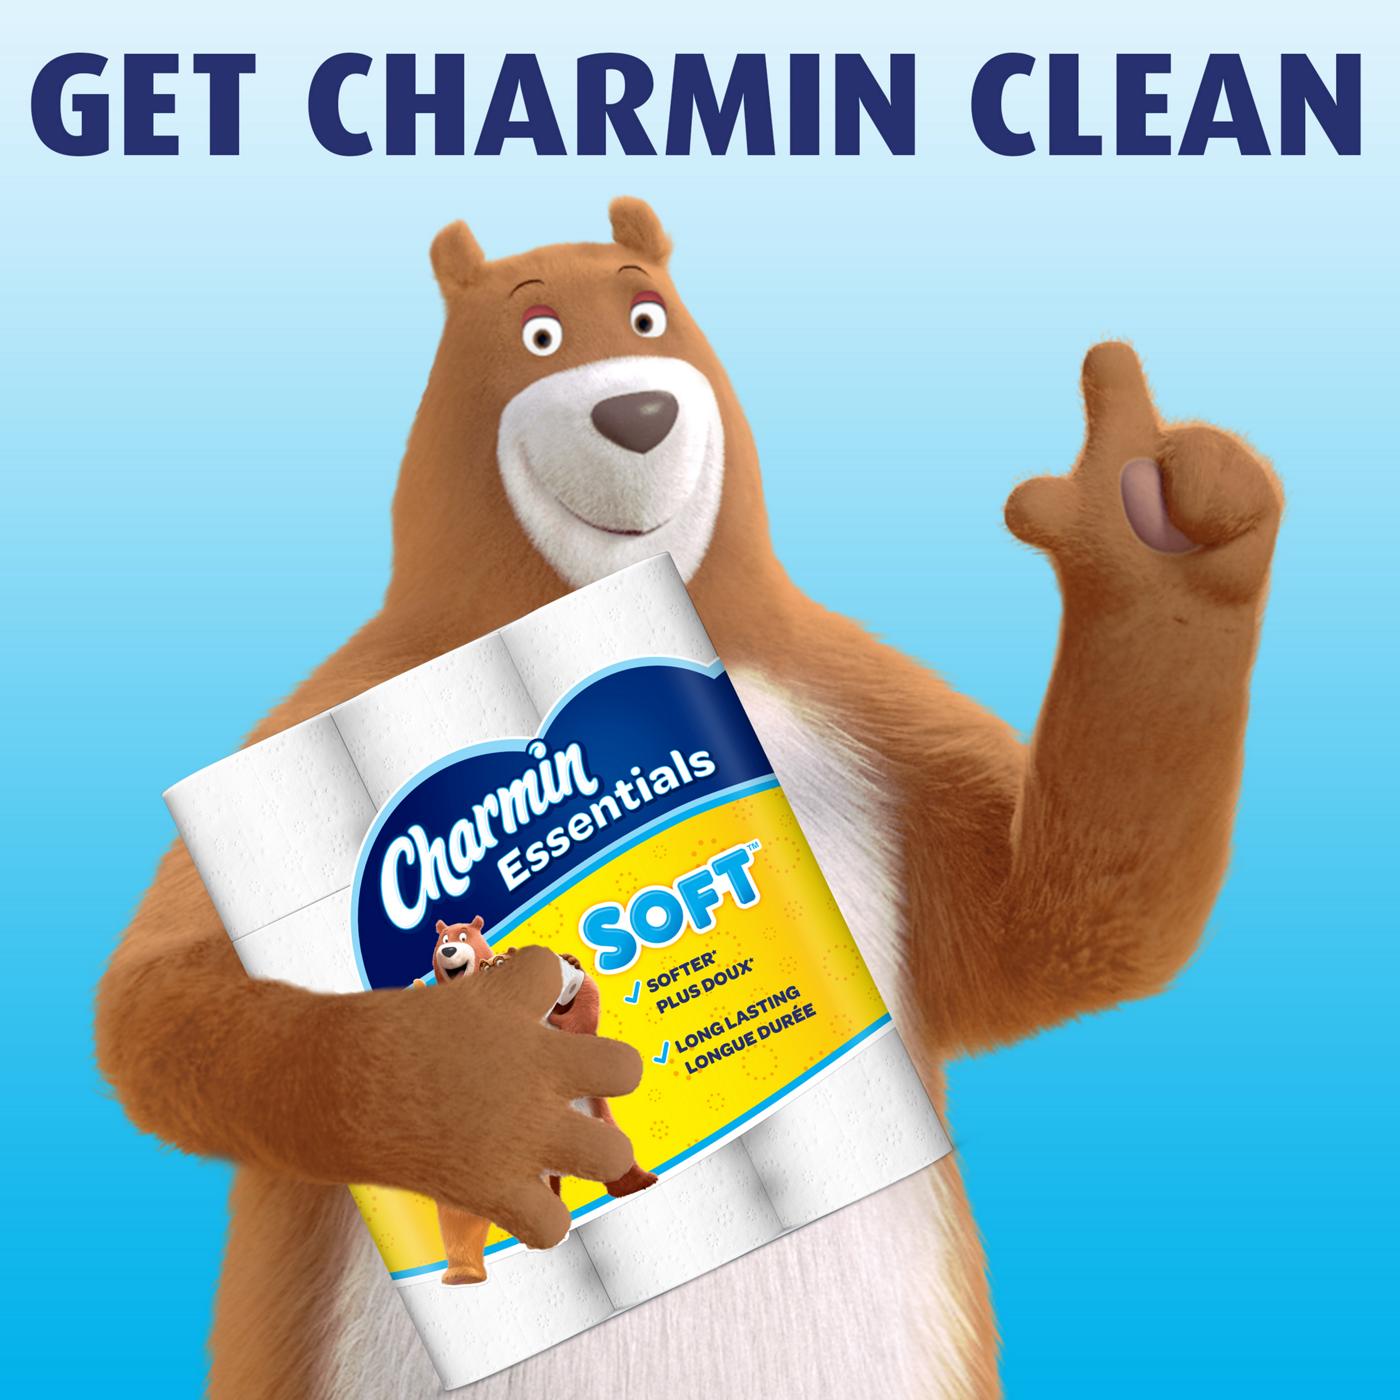 Charmin Essentials Soft Toilet Paper; image 9 of 13